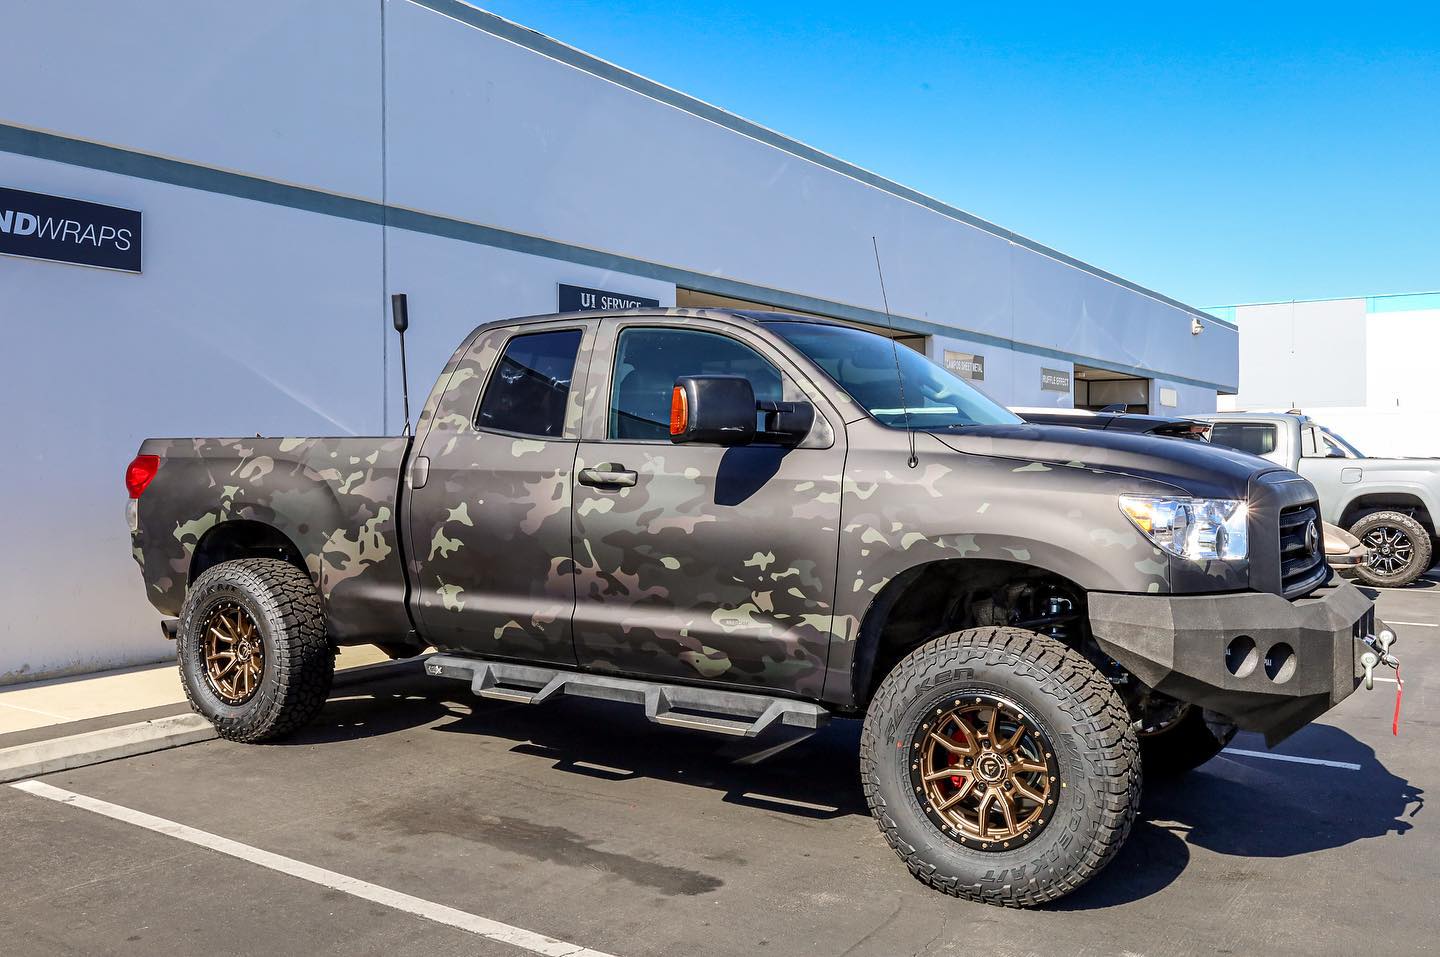 Image Number 9129 displays a Toyota Tundra that features 20-inch Fuel Lethal Wheels, which are only available at Butler Tires and Wheels in Atlanta, GA.